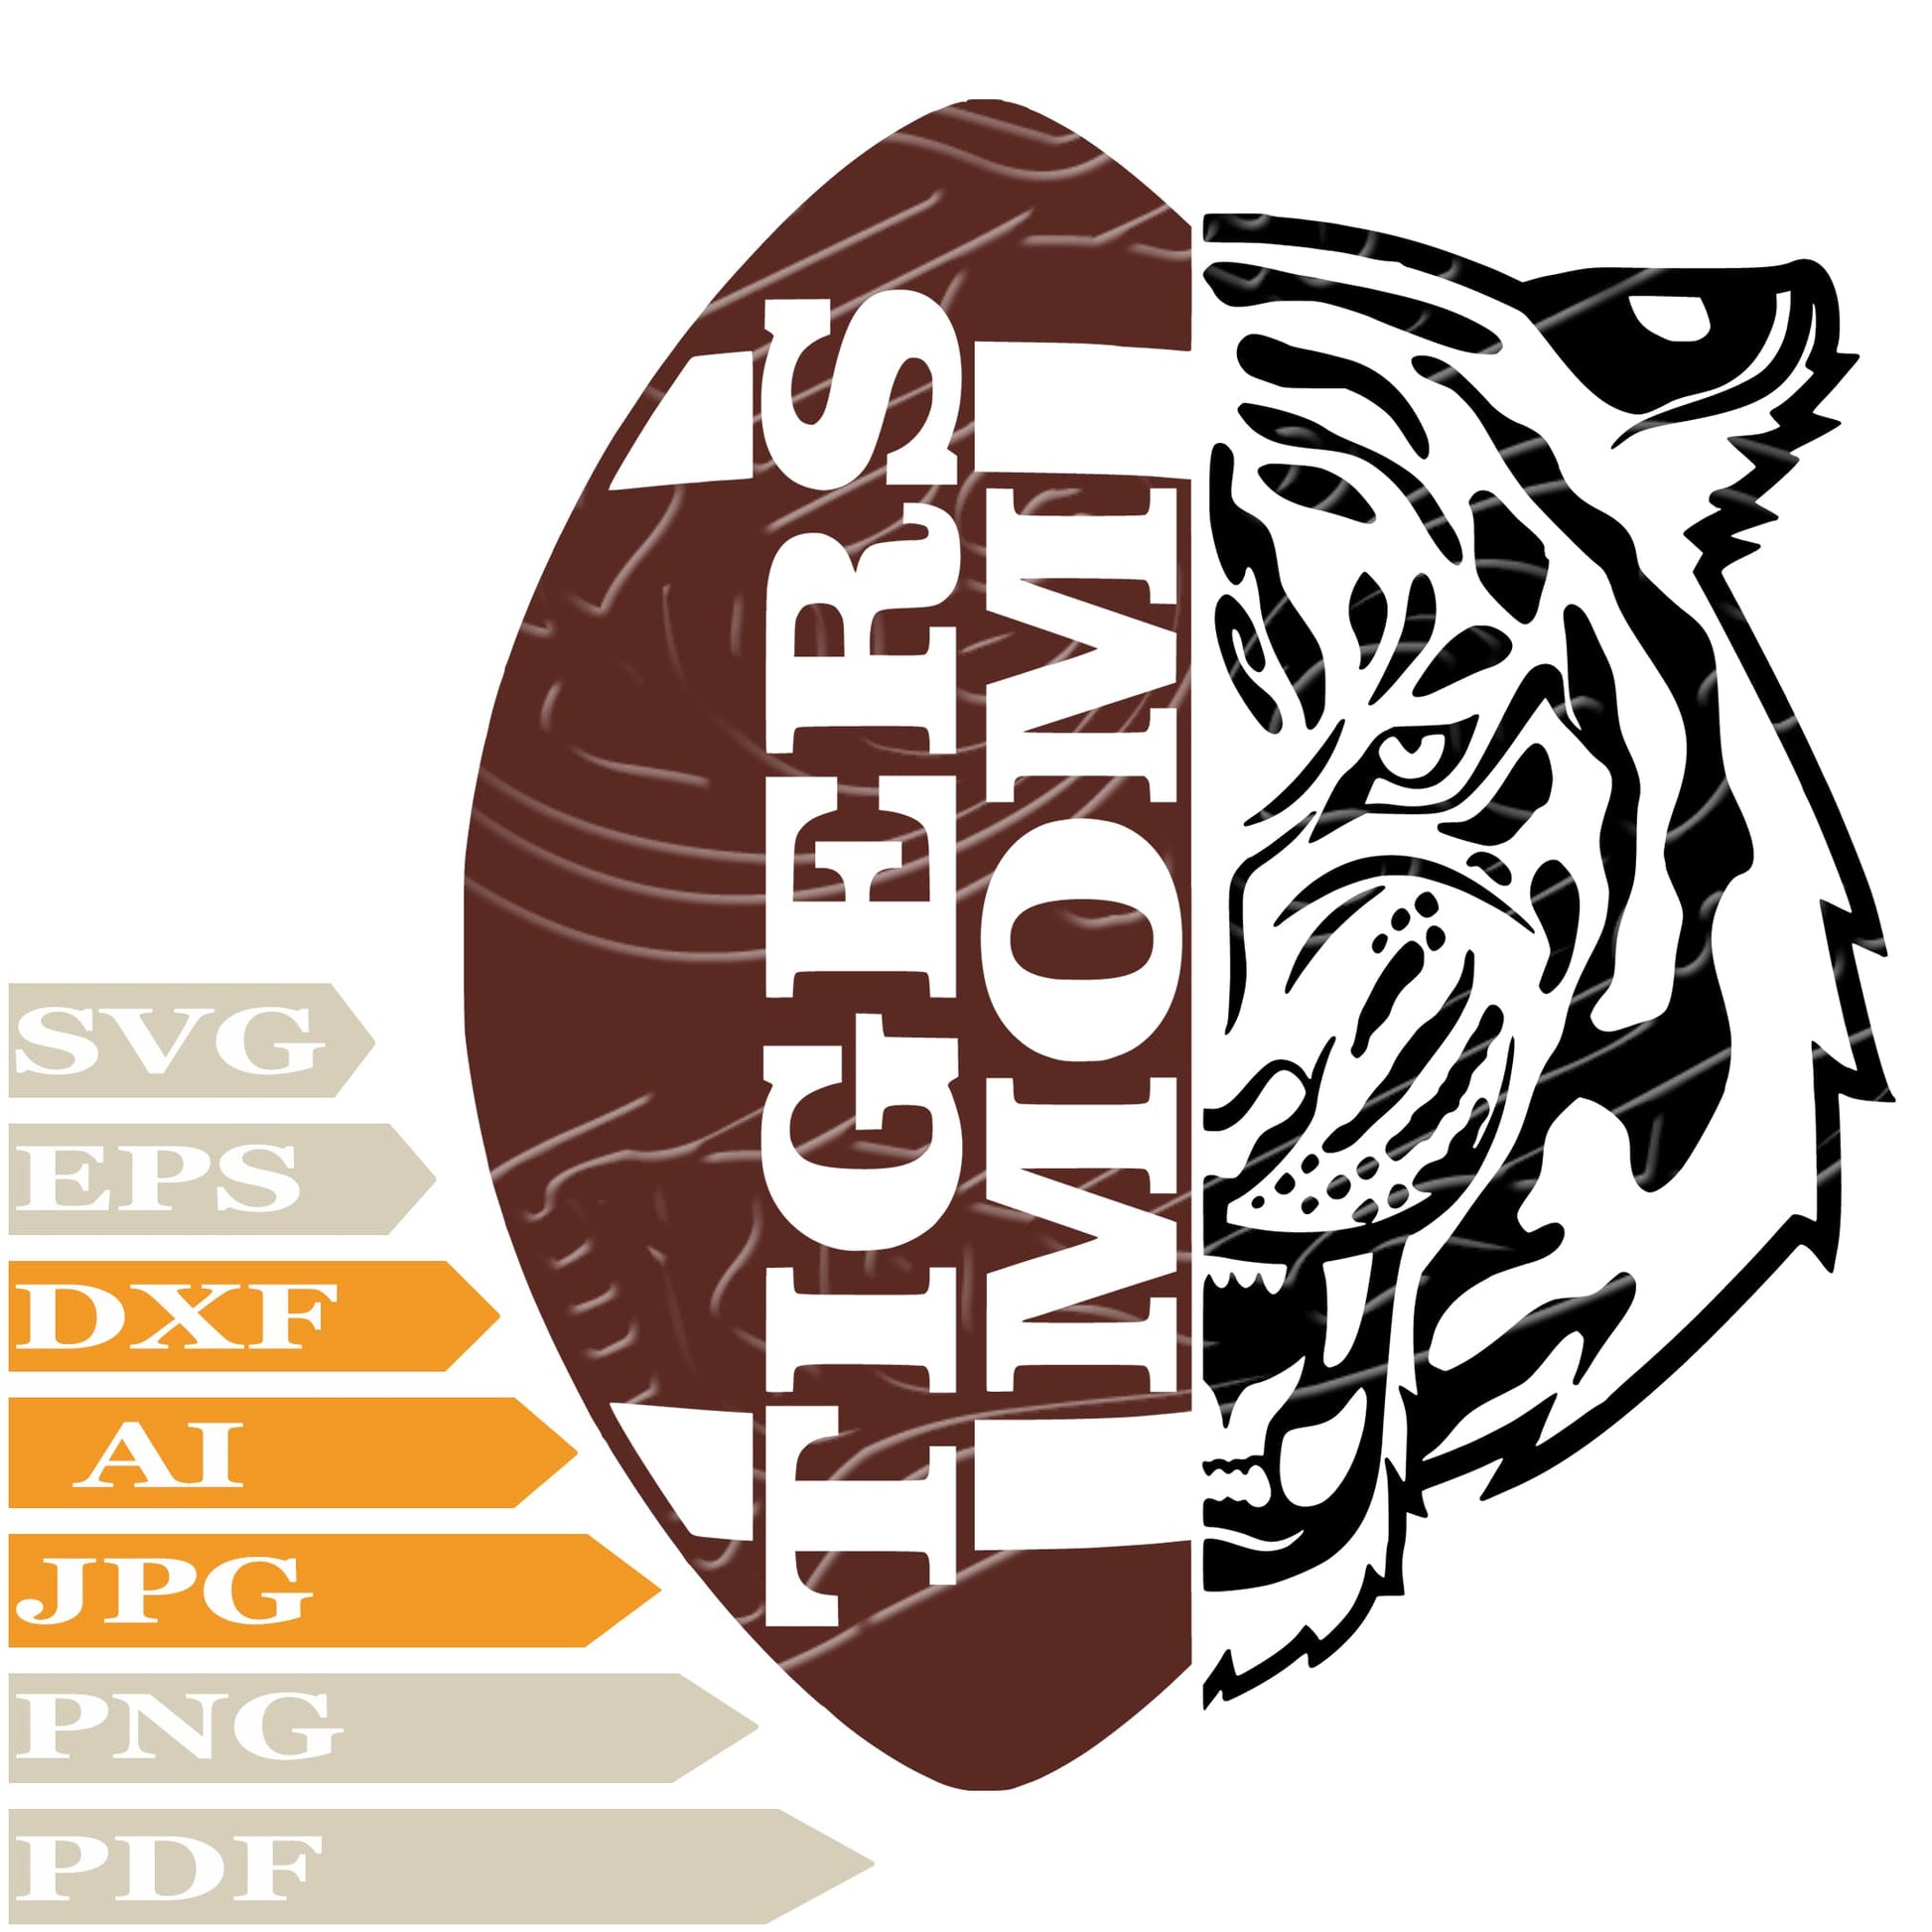 Tigers Football, Tigers Mom Logo Svg File, Image Cut, Png, For Tattoo, Silhouette, Digital Vector Download, Cut File, Clipart, For Cricut